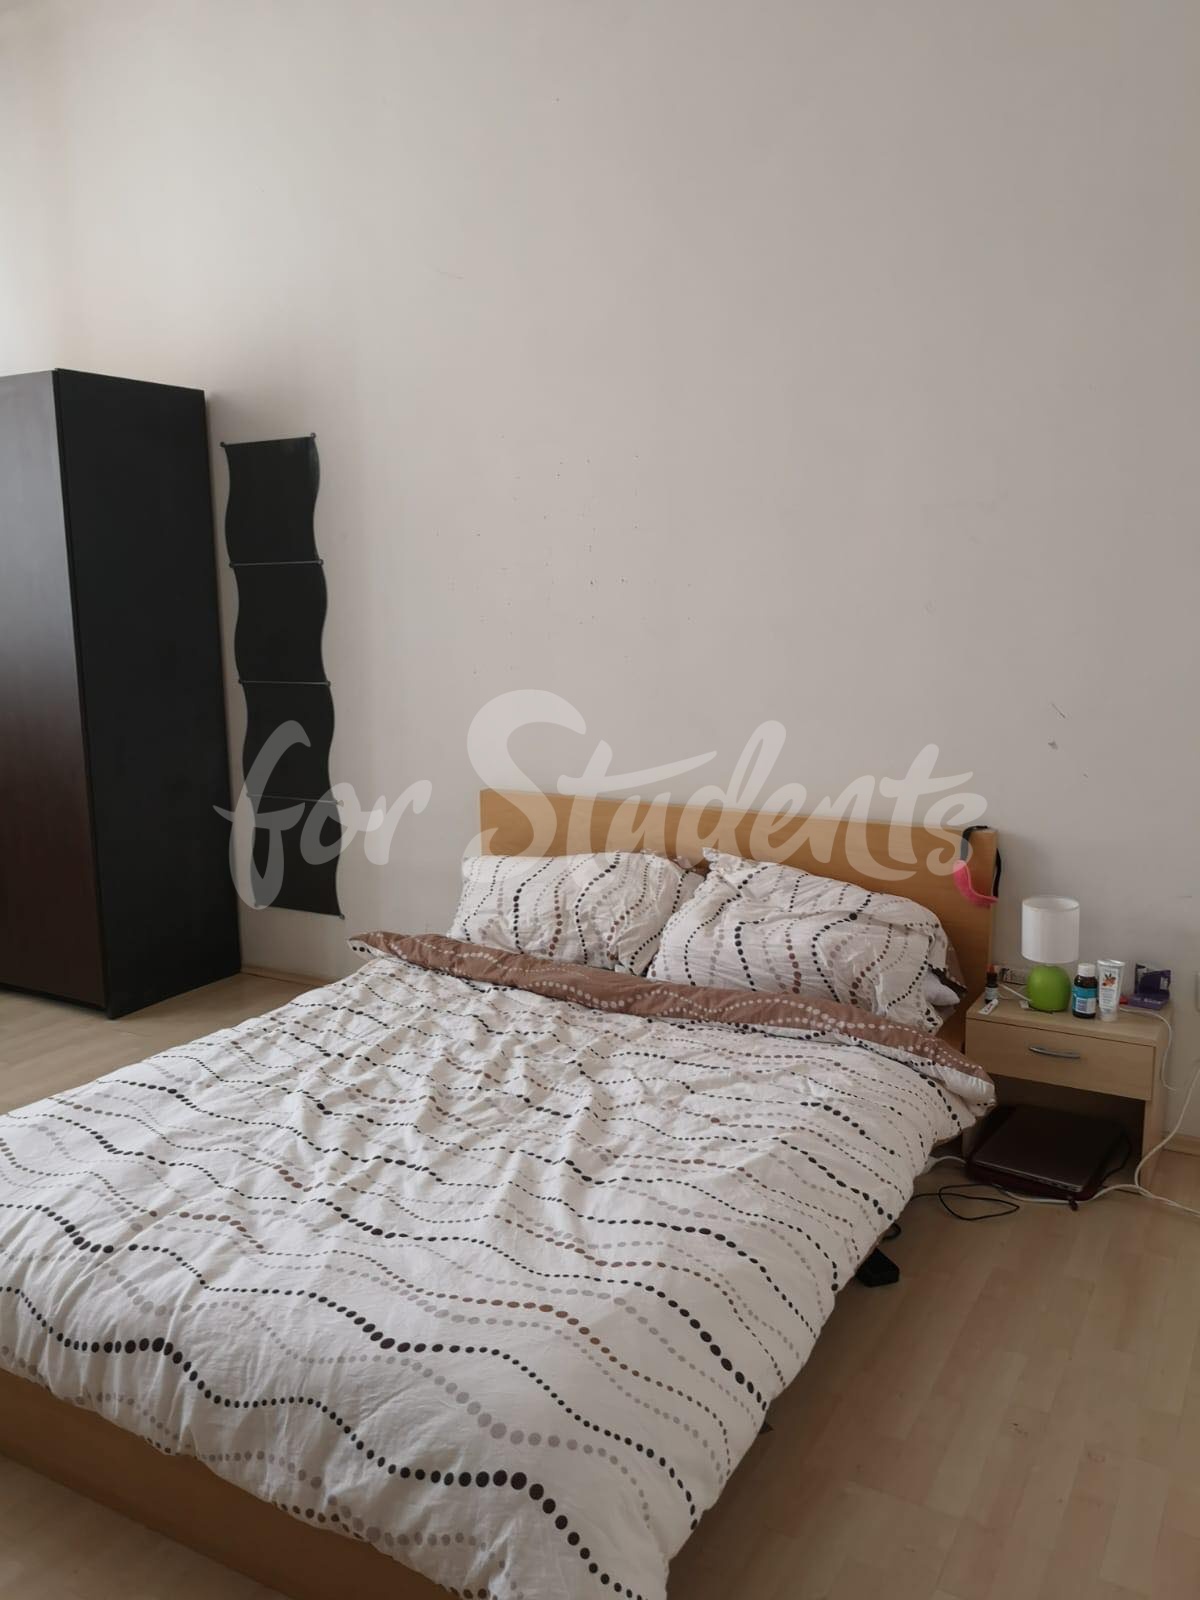 One bedroom available in male 3bedroom apartment in popular student's residency, Hradec Králové